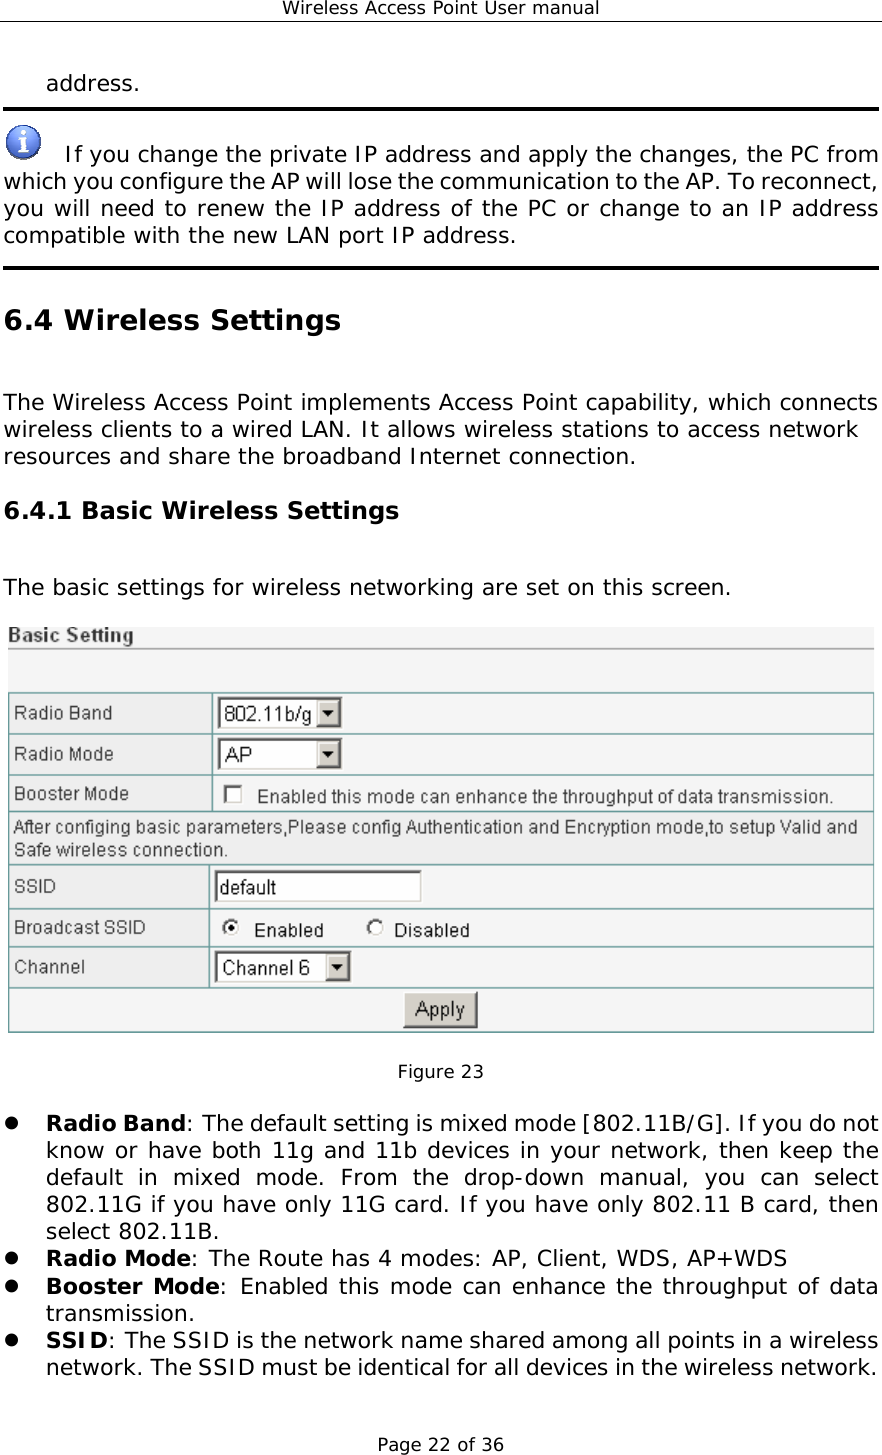 Wireless Access Point User manual Page 22 of 36 address.    If you change the private IP address and apply the changes, the PC from which you configure the AP will lose the communication to the AP. To reconnect, you will need to renew the IP address of the PC or change to an IP address compatible with the new LAN port IP address.  6.4 Wireless Settings The Wireless Access Point implements Access Point capability, which connects wireless clients to a wired LAN. It allows wireless stations to access network resources and share the broadband Internet connection. 6.4.1 Basic Wireless Settings The basic settings for wireless networking are set on this screen.    Figure 23  z Radio Band: The default setting is mixed mode [802.11B/G]. If you do not know or have both 11g and 11b devices in your network, then keep the default in mixed mode. From the drop-down manual, you can select 802.11G if you have only 11G card. If you have only 802.11 B card, then select 802.11B. z Radio Mode: The Route has 4 modes: AP, Client, WDS, AP+WDS z Booster Mode: Enabled this mode can enhance the throughput of data transmission. z SSID: The SSID is the network name shared among all points in a wireless network. The SSID must be identical for all devices in the wireless network. 